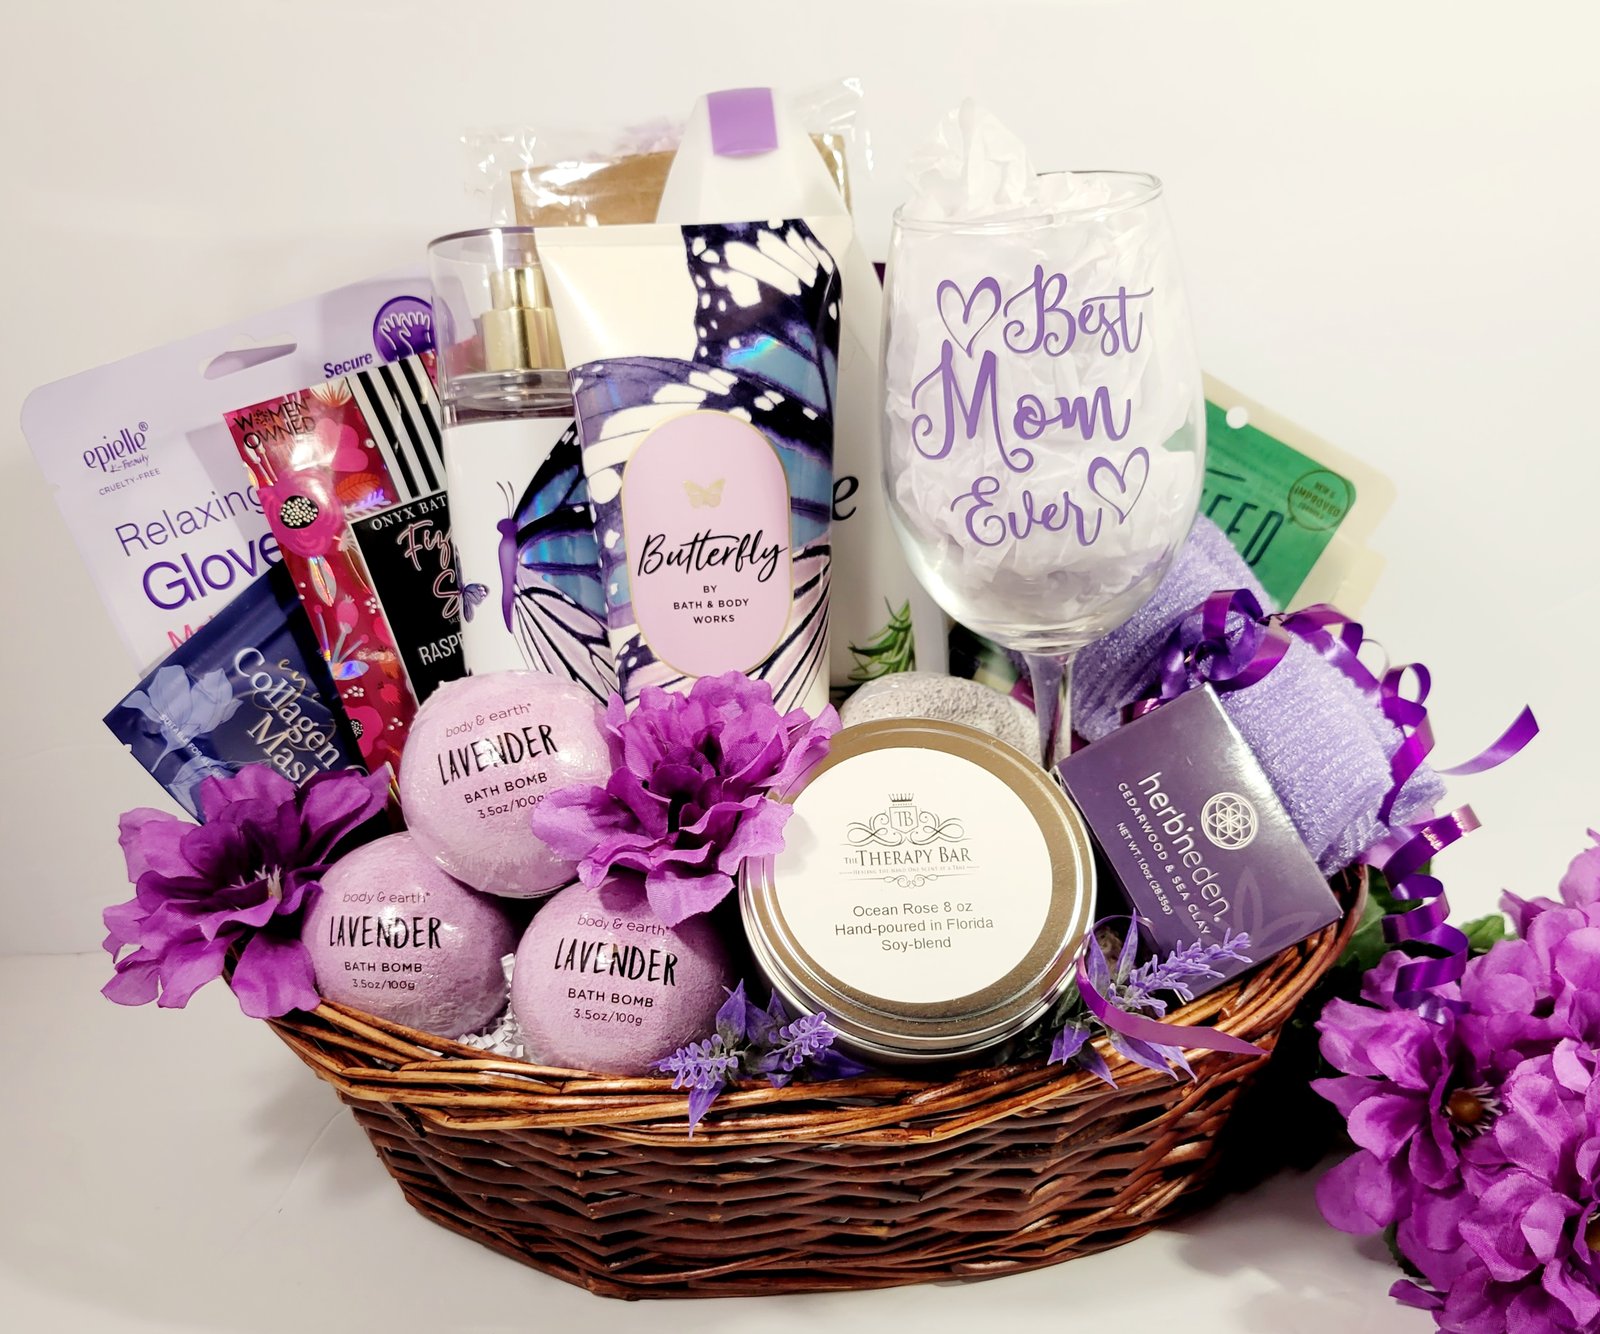 Spoil Mom with Any of These DIY Gift Basket Ideas - Natalie Menke